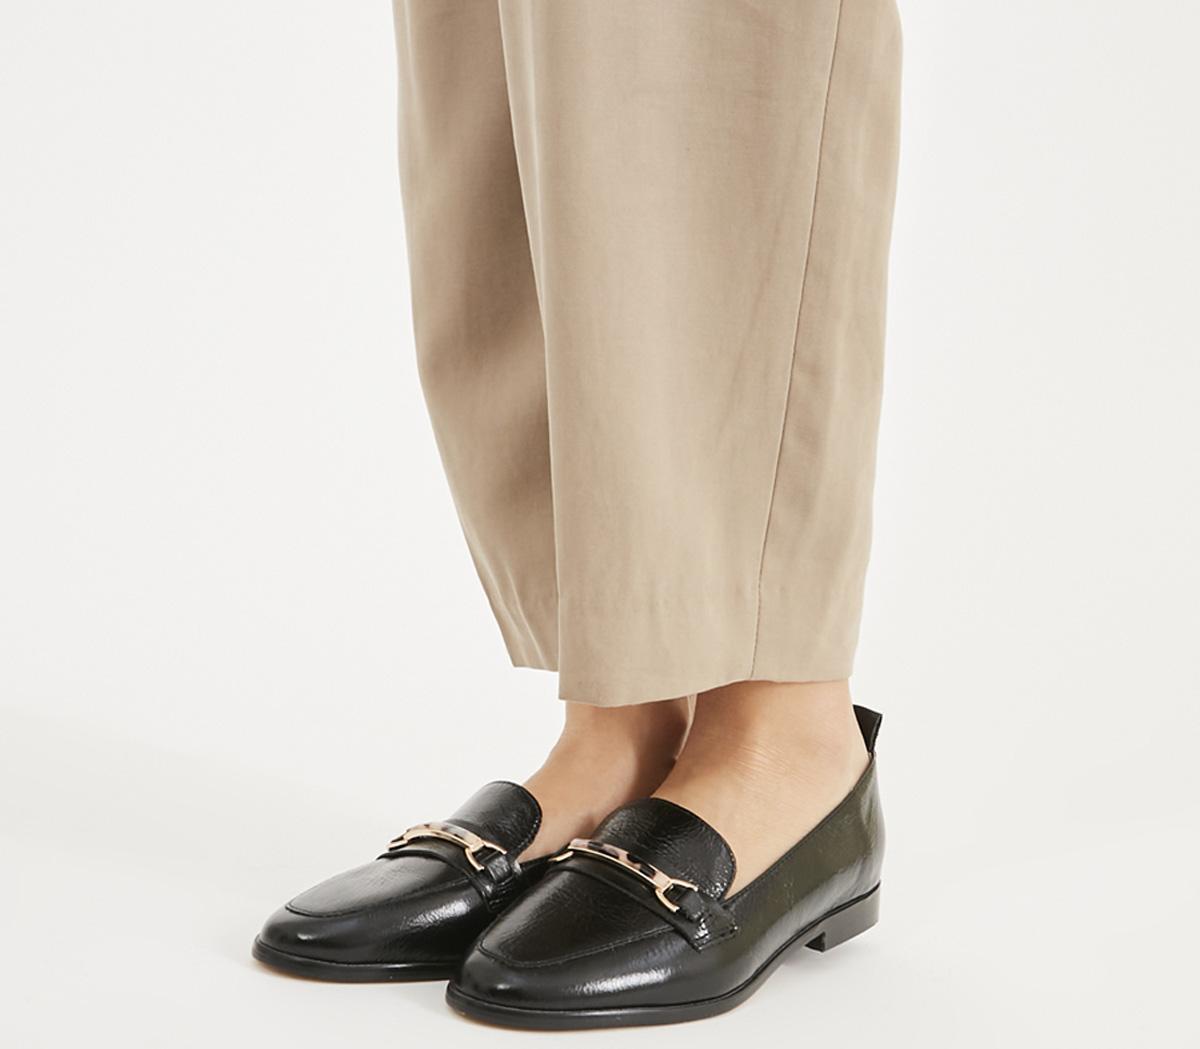 OFFICEFew Feature Trim LoafersBlack Leather